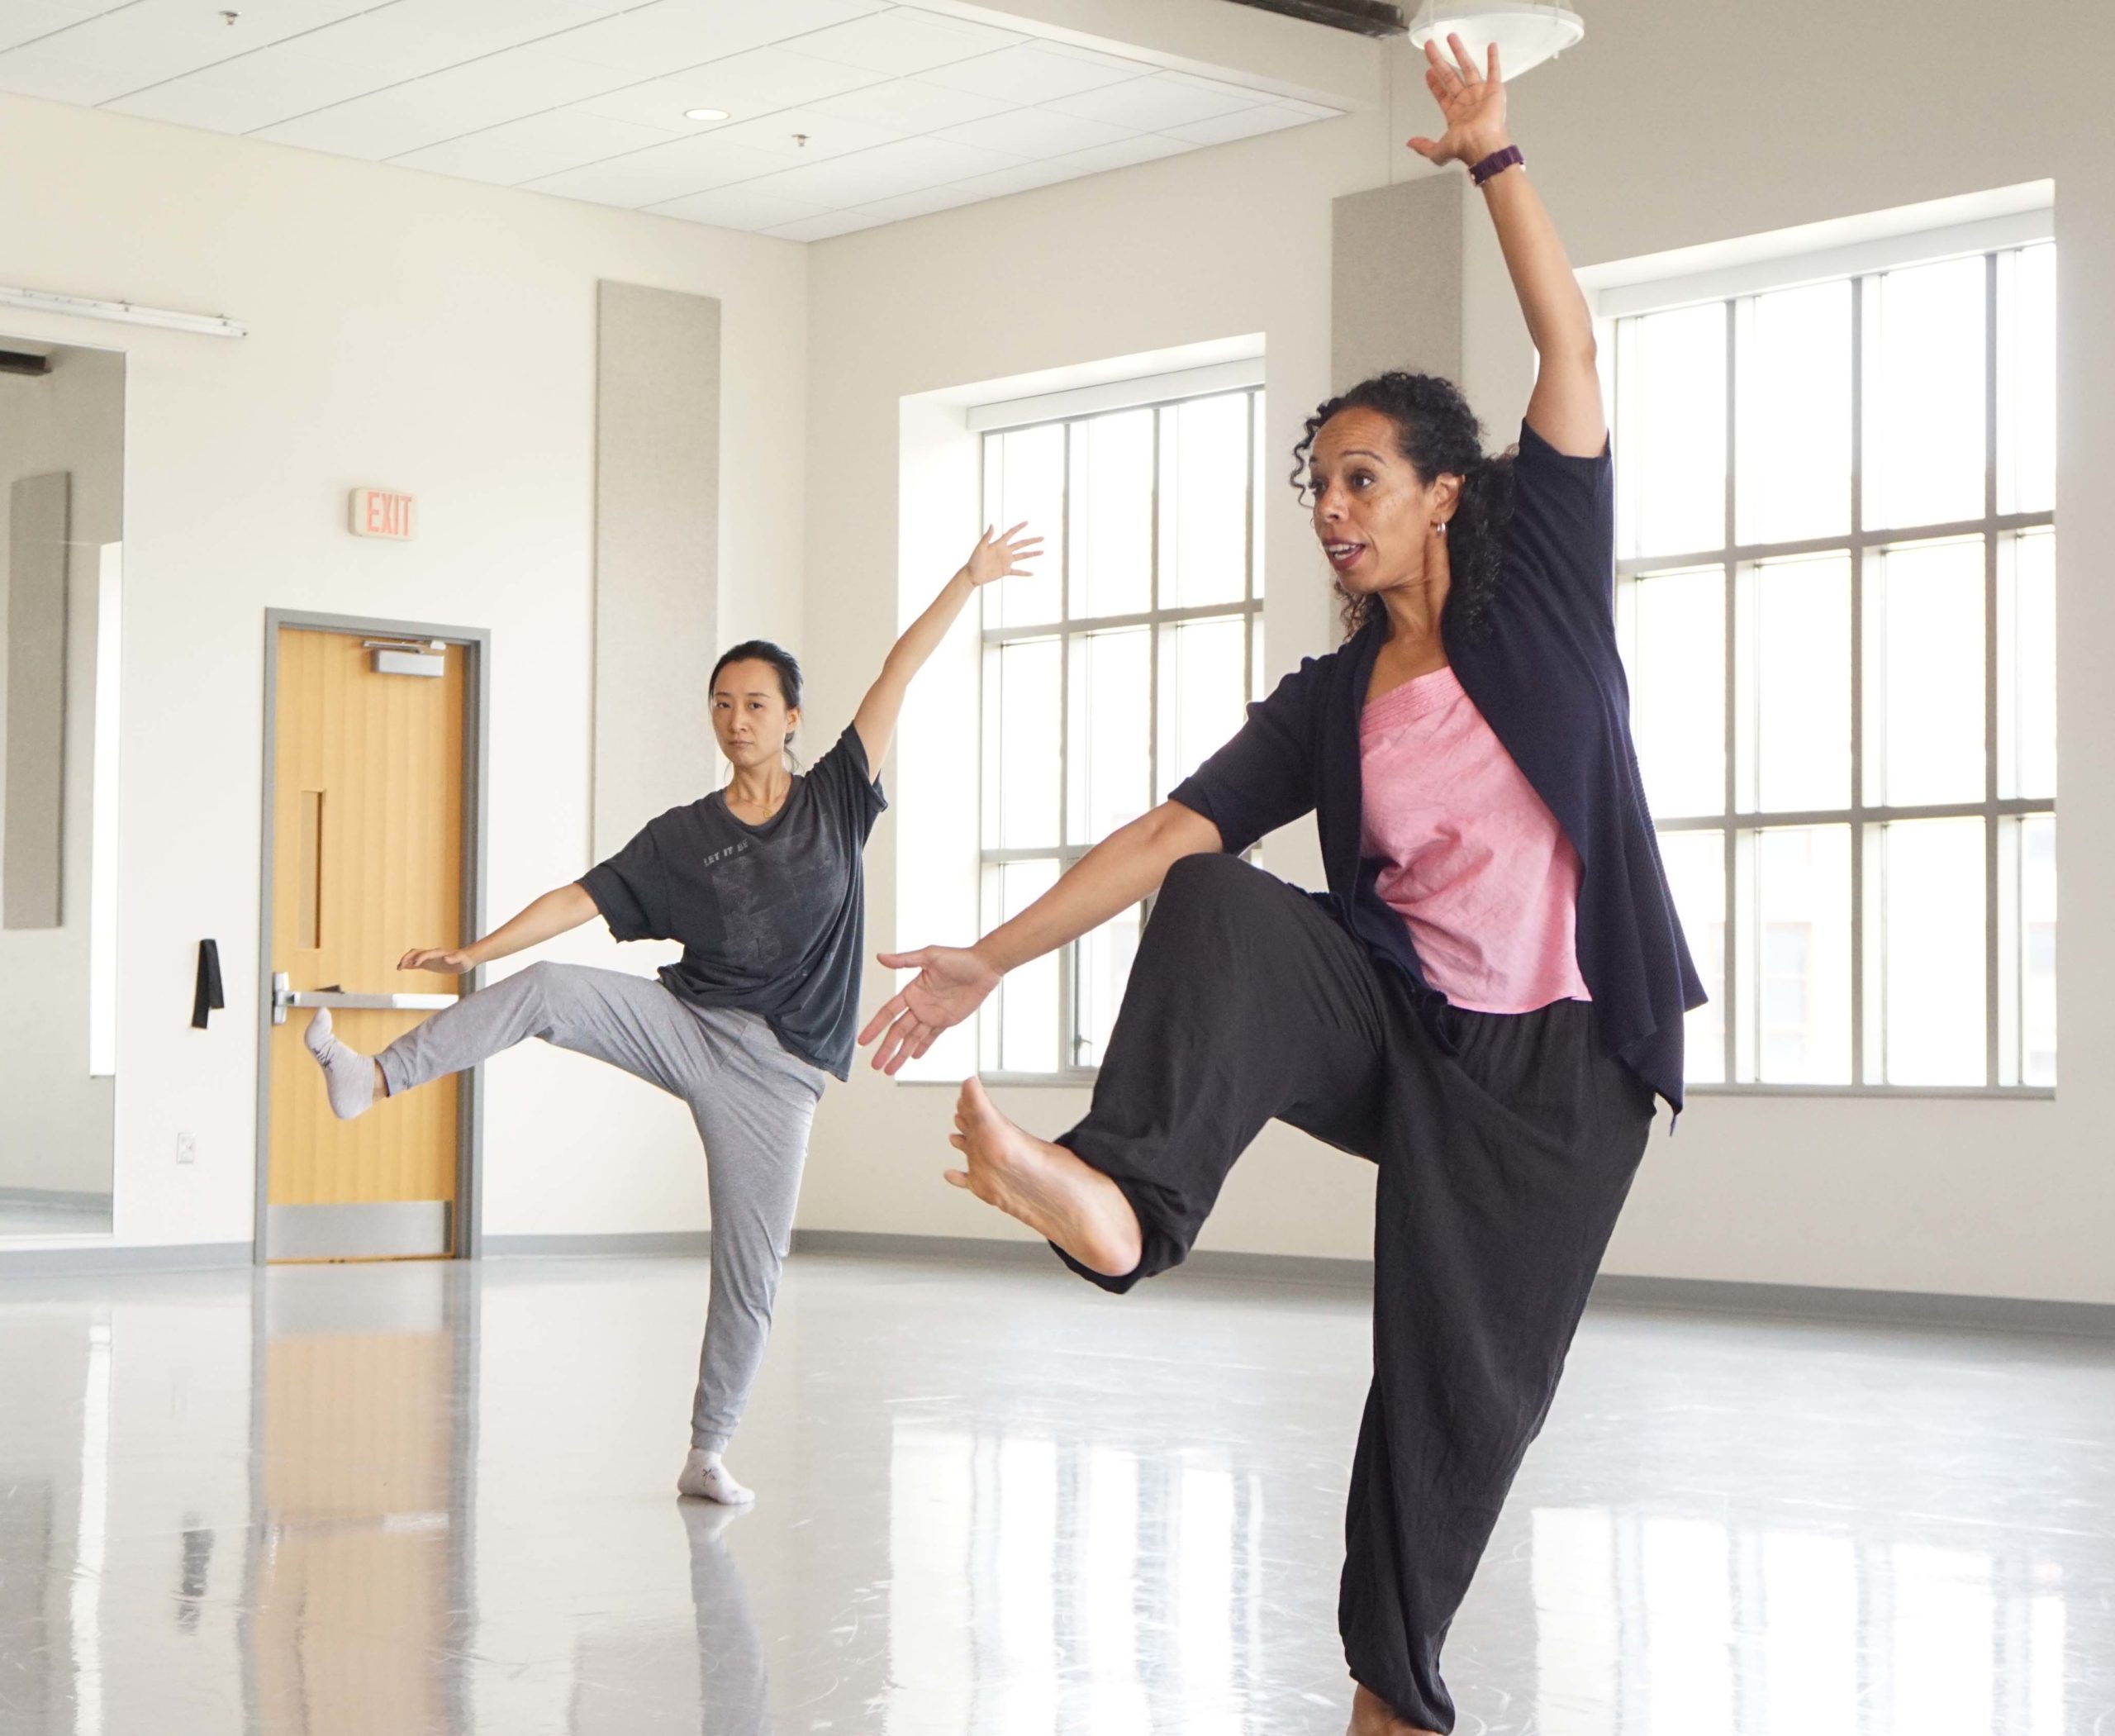 In a sunlit studio, Dr. Nyama McCarthy-Brown, dressed in loose black sweats and a jacket over a pink shirt, dark curls loosely pulled back from her face, demonstrates for a college-aged dancer. She moves through plié, her right knee pulling to her chest with a flexed foot. Her right arm is open at a downward diagonal to one side, while her left reaches with an open palm over head.